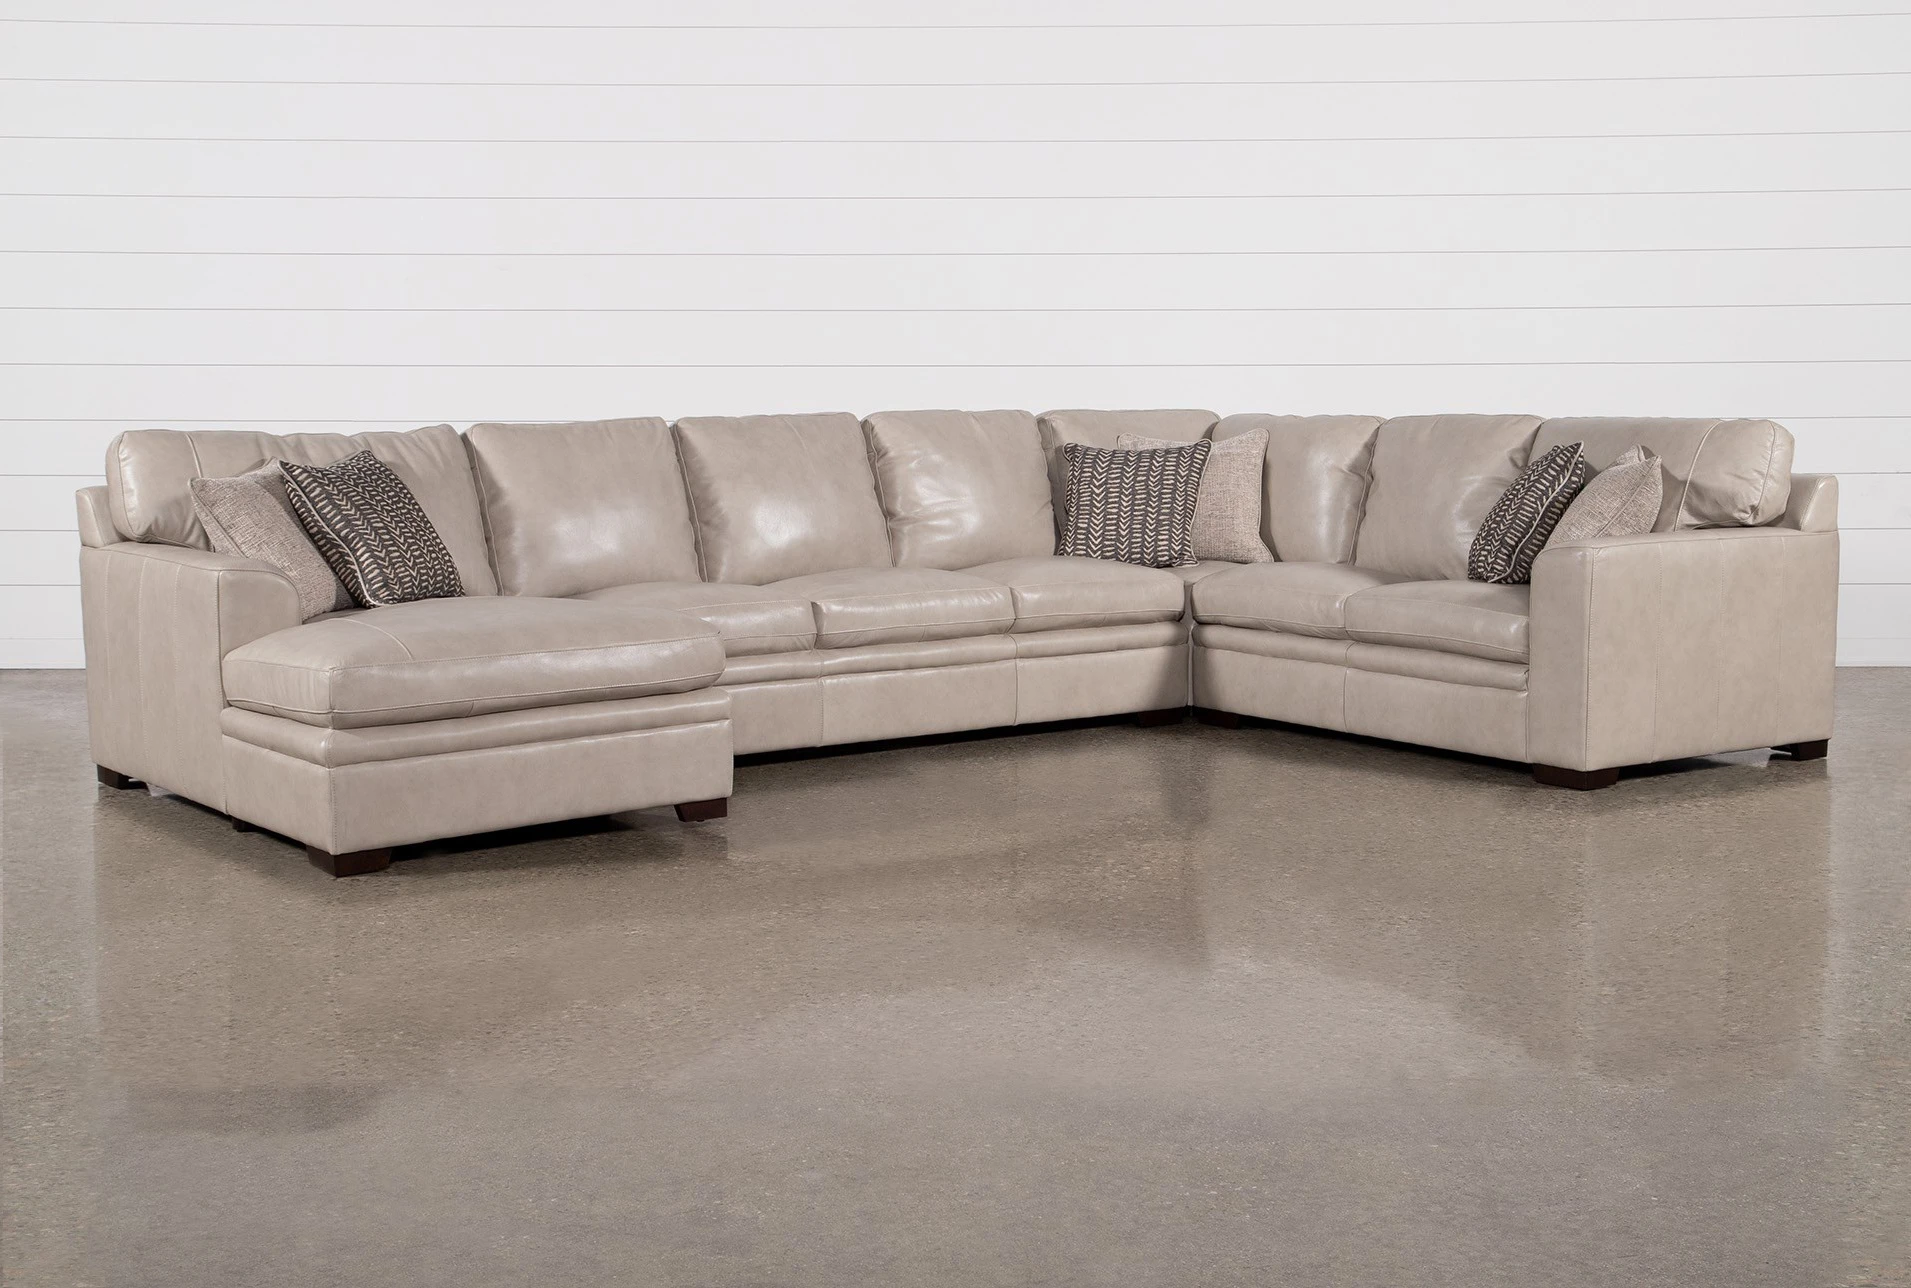 Greer Stone Leather 4 Piece 171, Leather Furniture Fort Worth